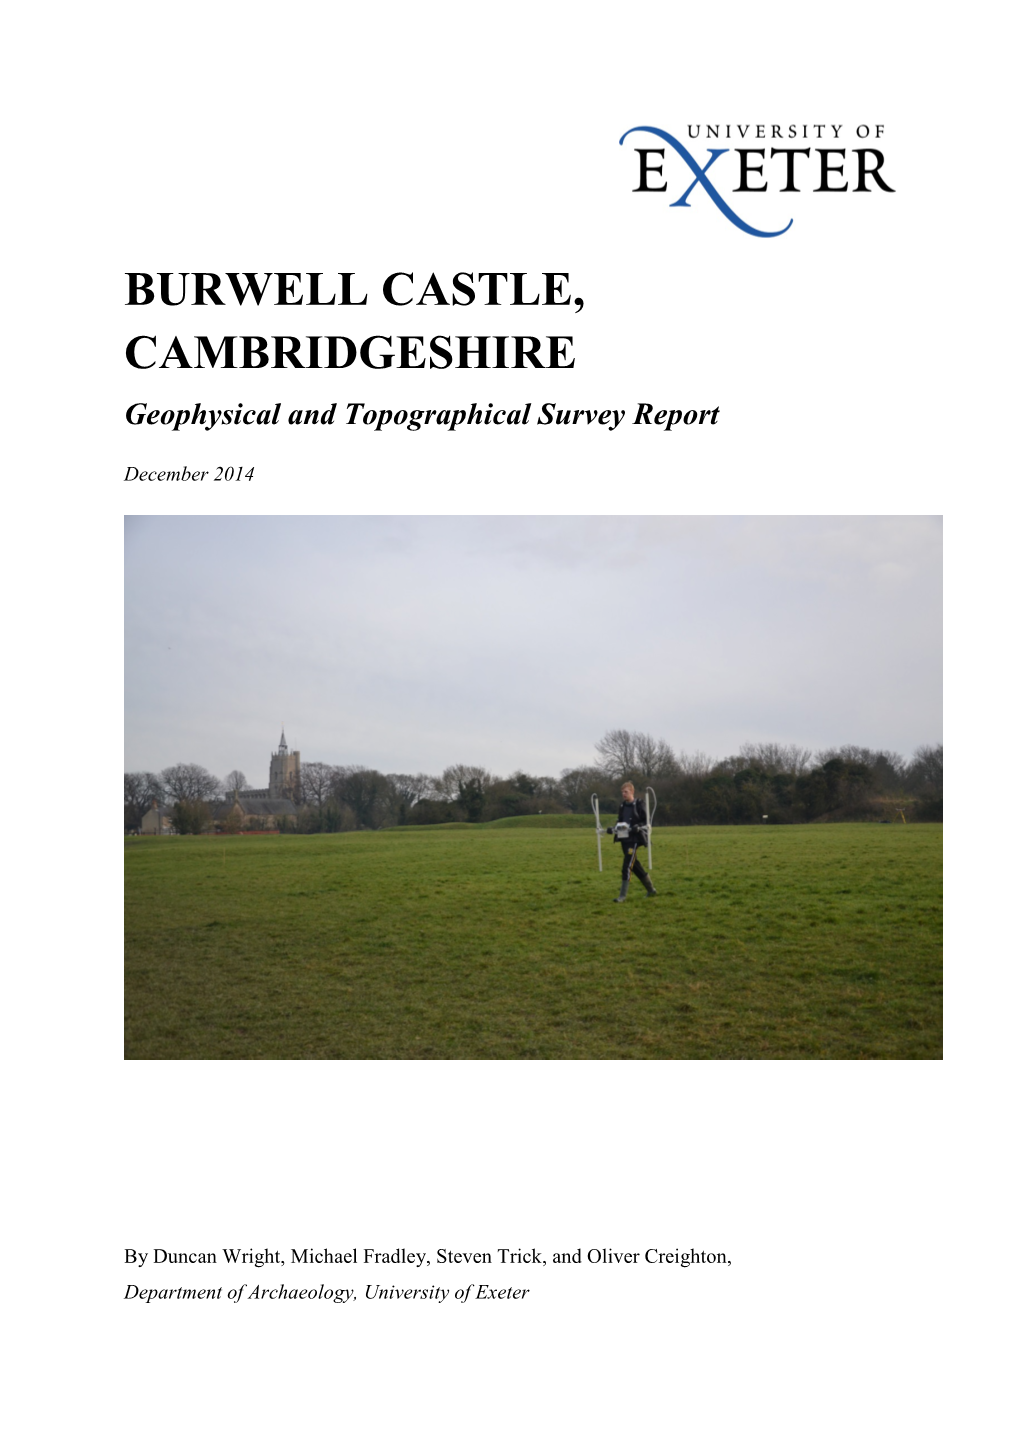 BURWELL CASTLE, CAMBRIDGESHIRE Geophysical and Topographical Survey Report